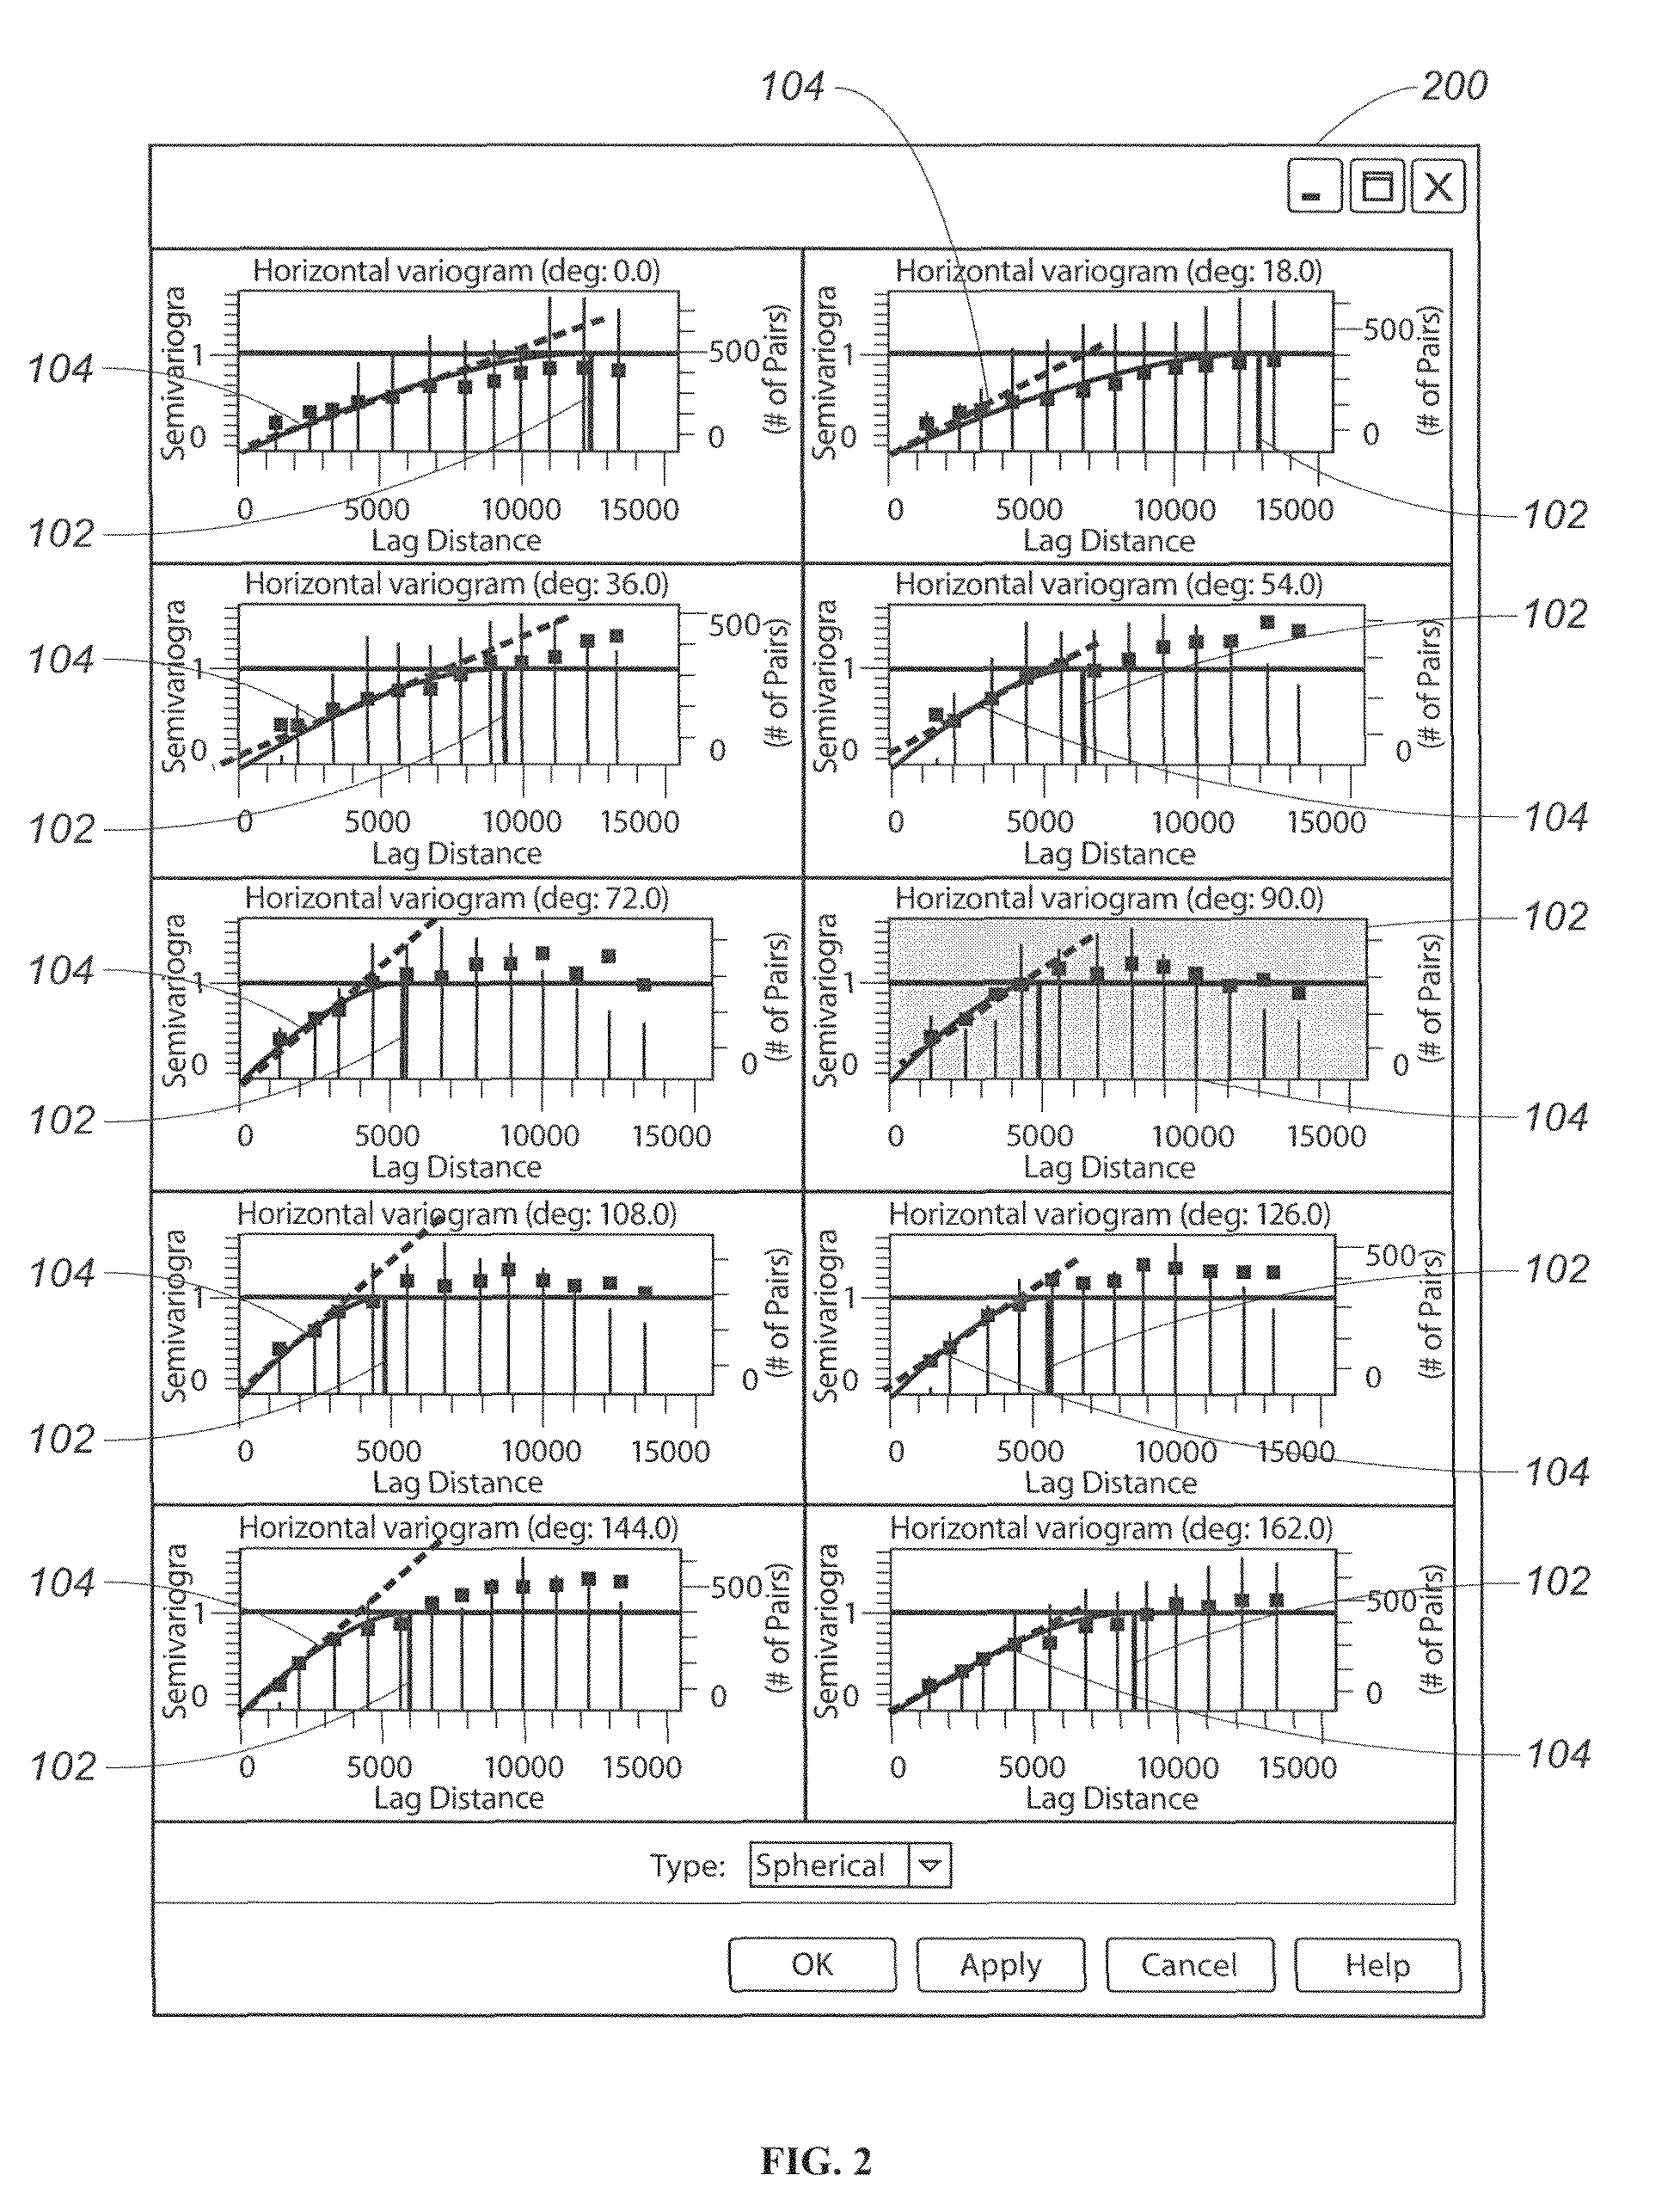 Systems and methods for computing a variogram model